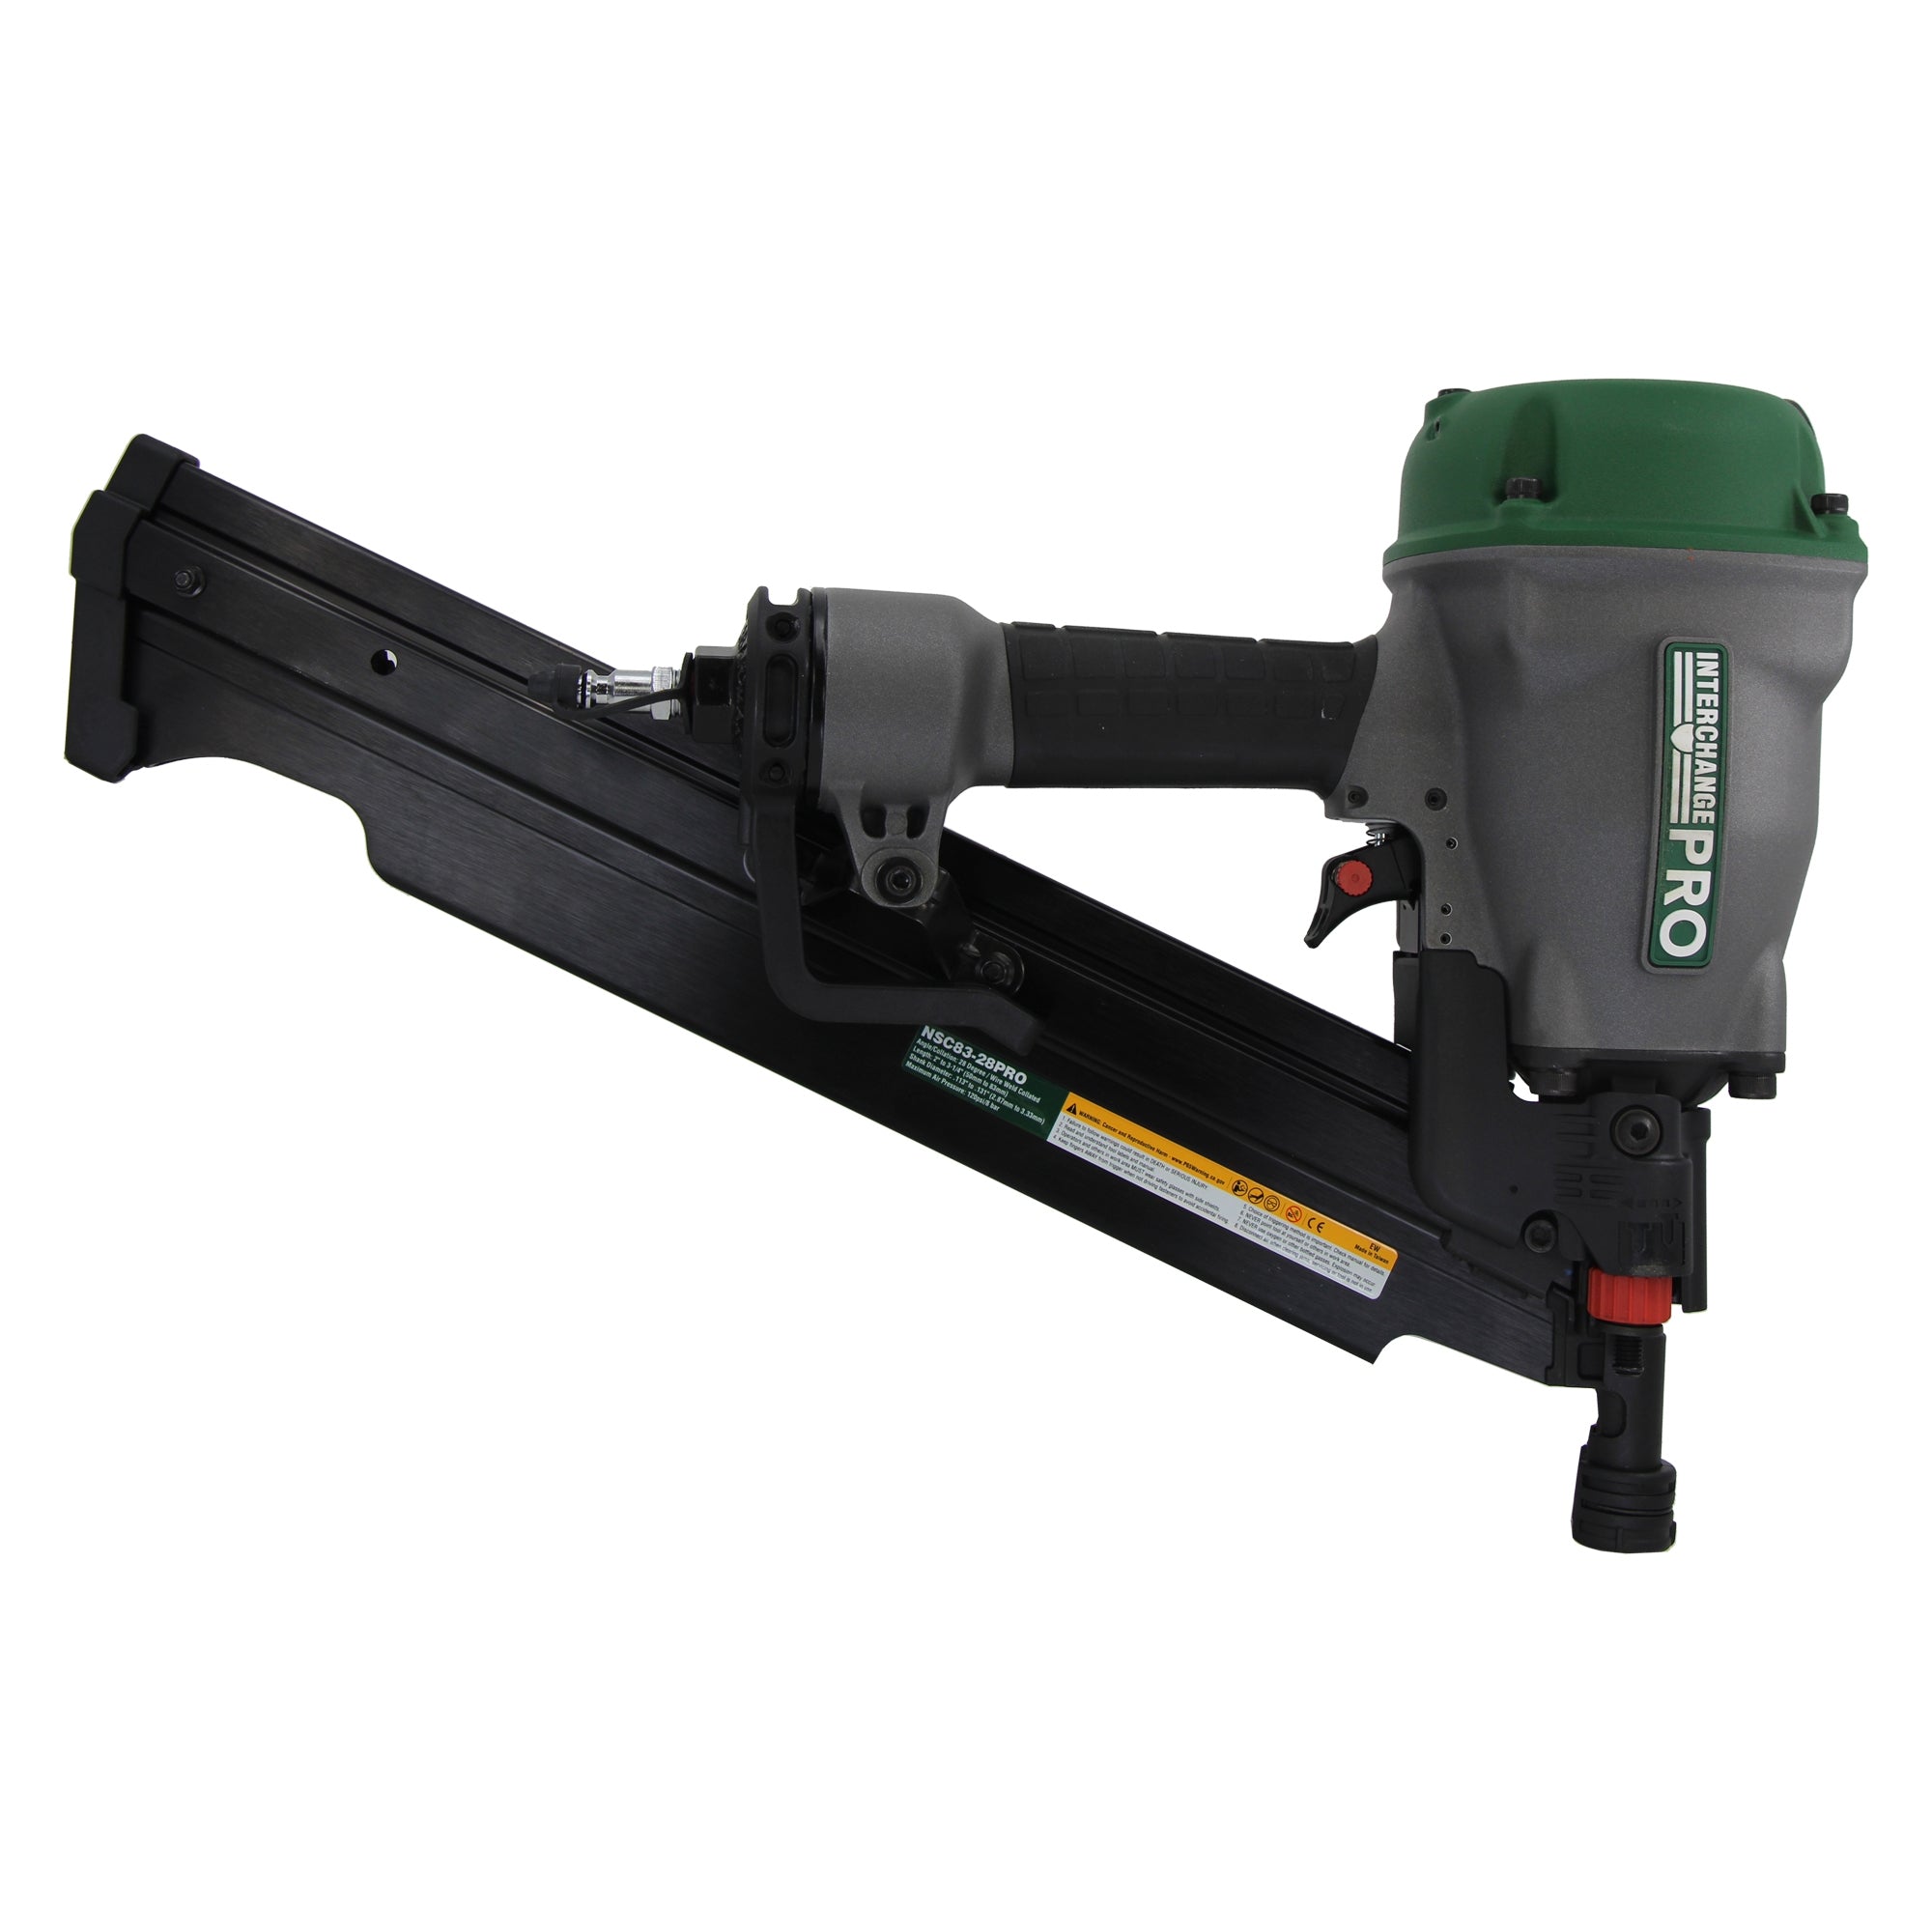 Interchange Pro NSC83-28PRO 28-Degree 3-1/4" Wire Collated Strip Clipped Head Heavy Duty Framing Nailer with Adjustable Depth of Drive